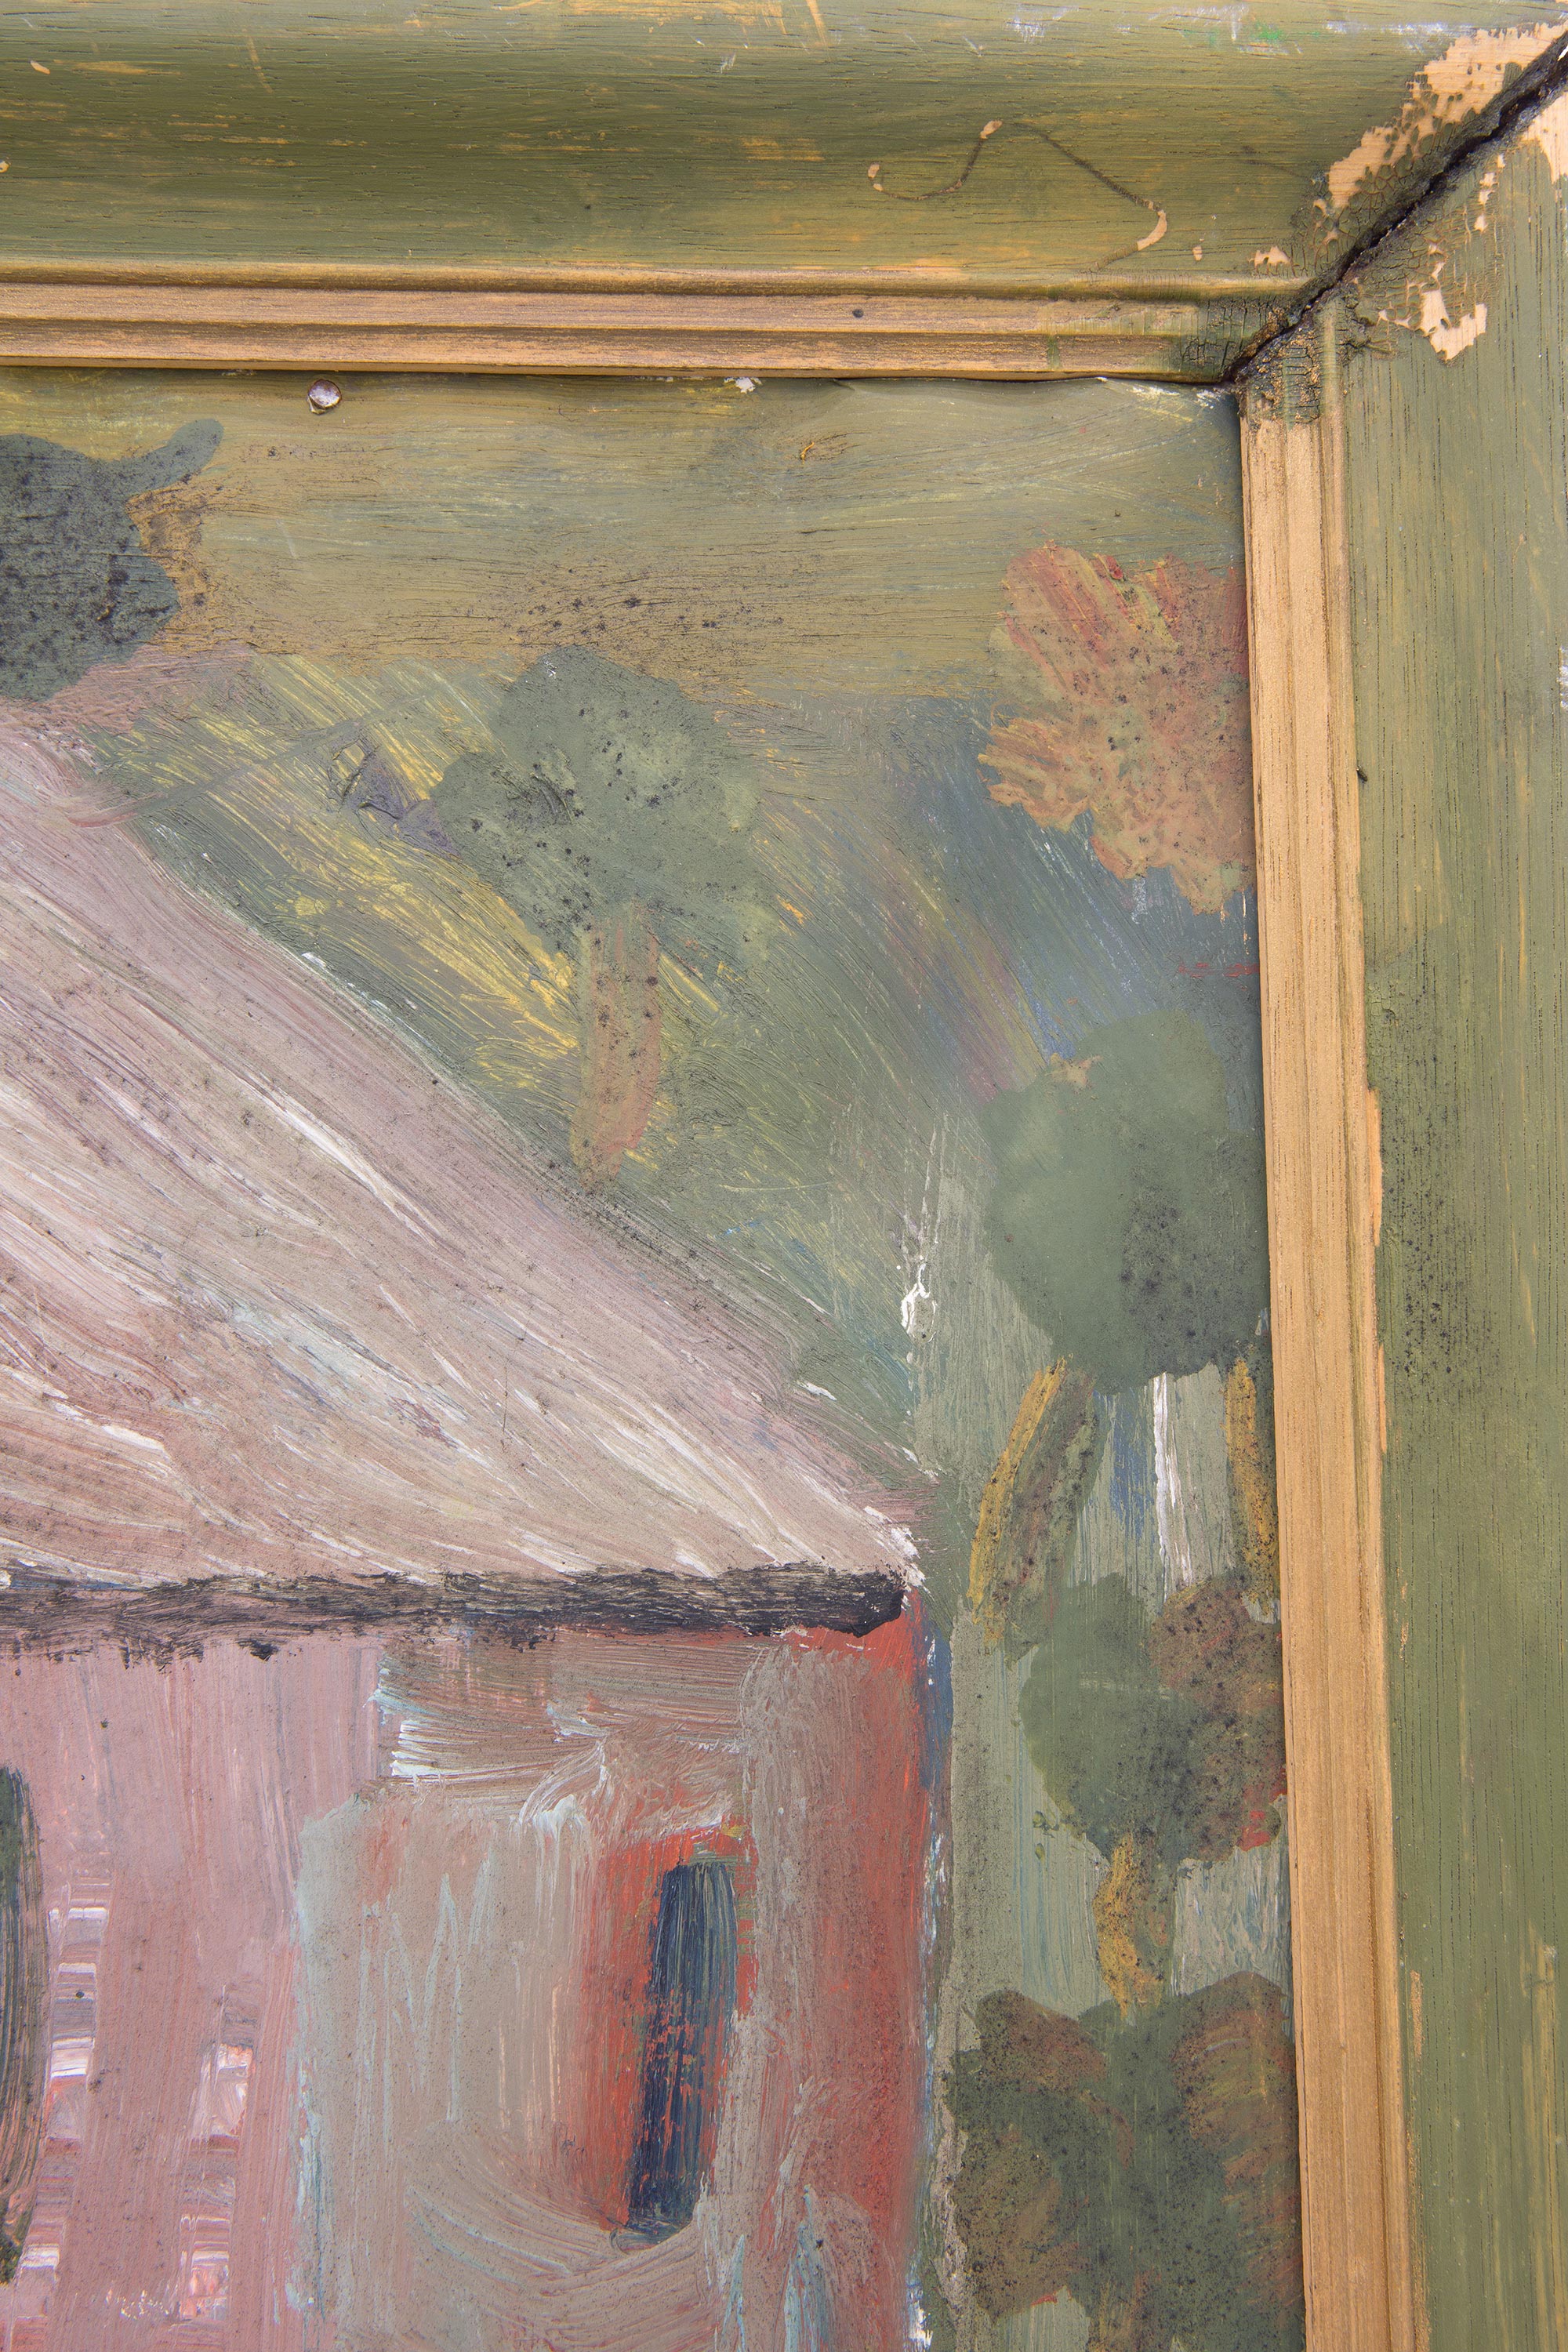 “Convict Building” (detail), 1971, oil on paper, 590 × 700 mm